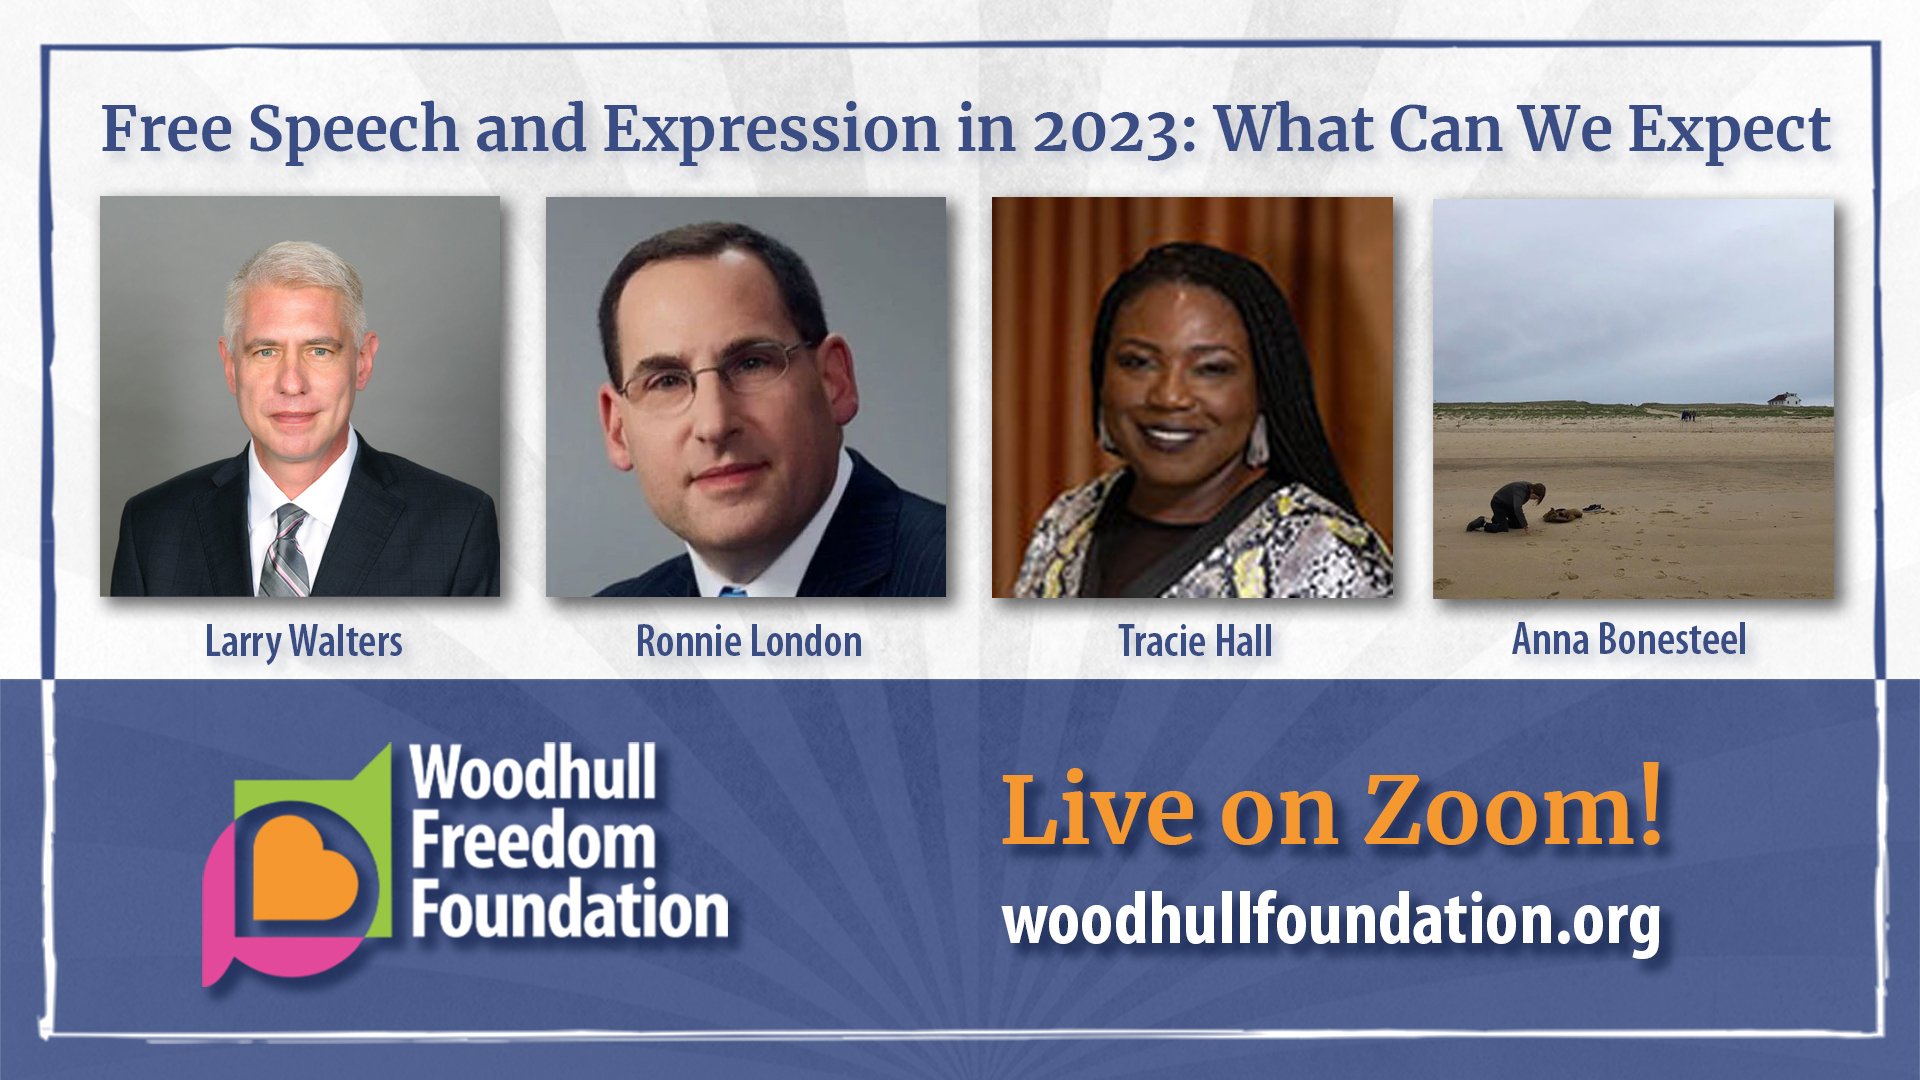 Promotional Graphic for Woodhul's Program called "Free Speech and Expression in 2023: What Can We Expect"